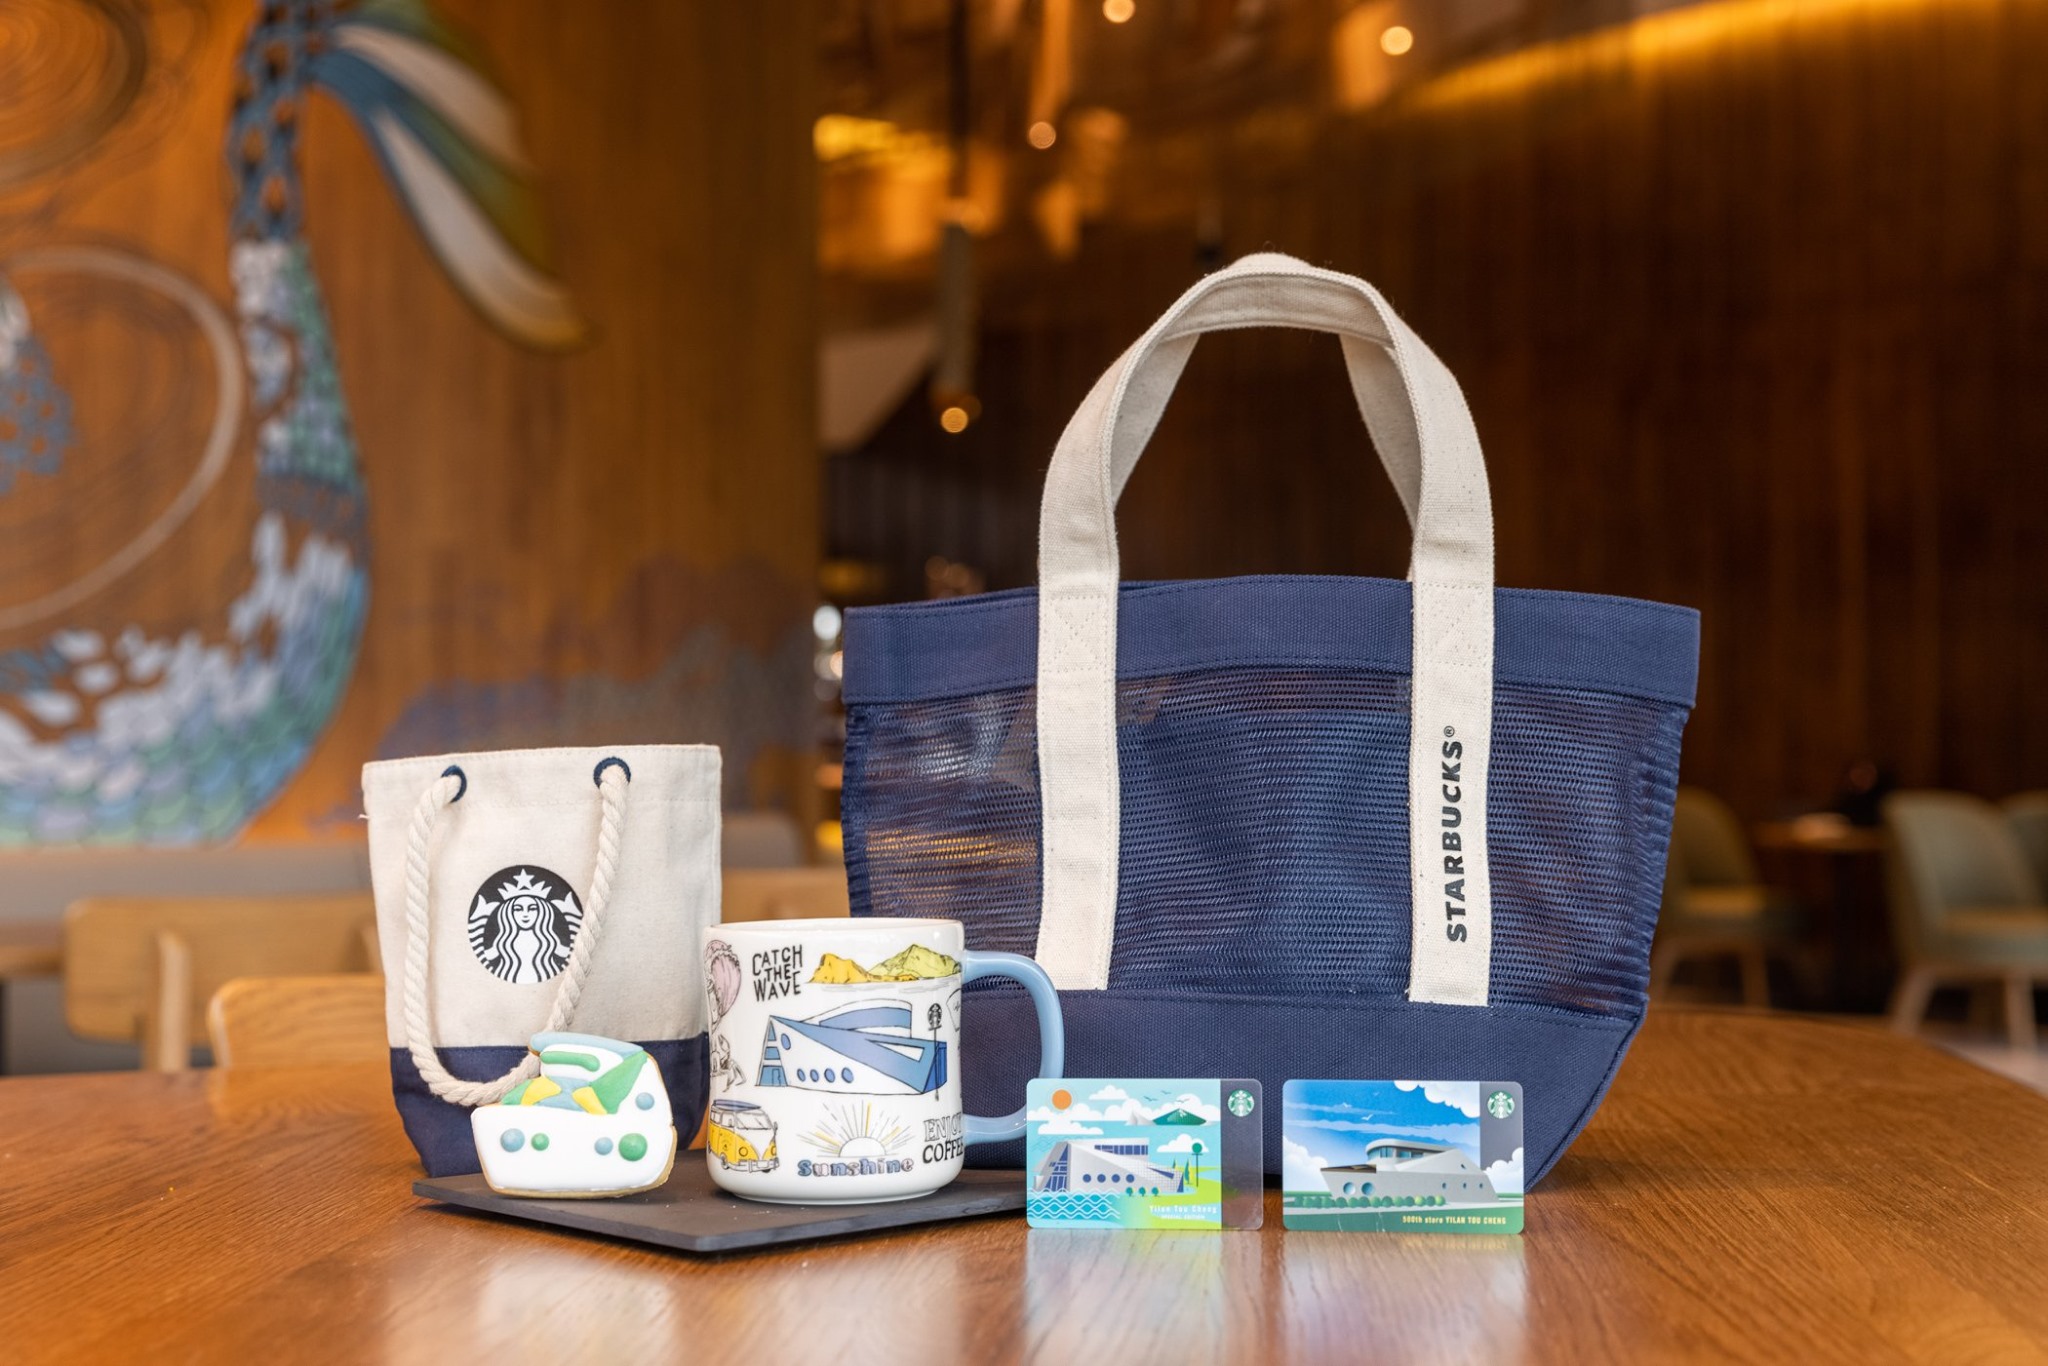 Cruise shipshaped Starbucks outlet opens in Taiwan Mothership.SG